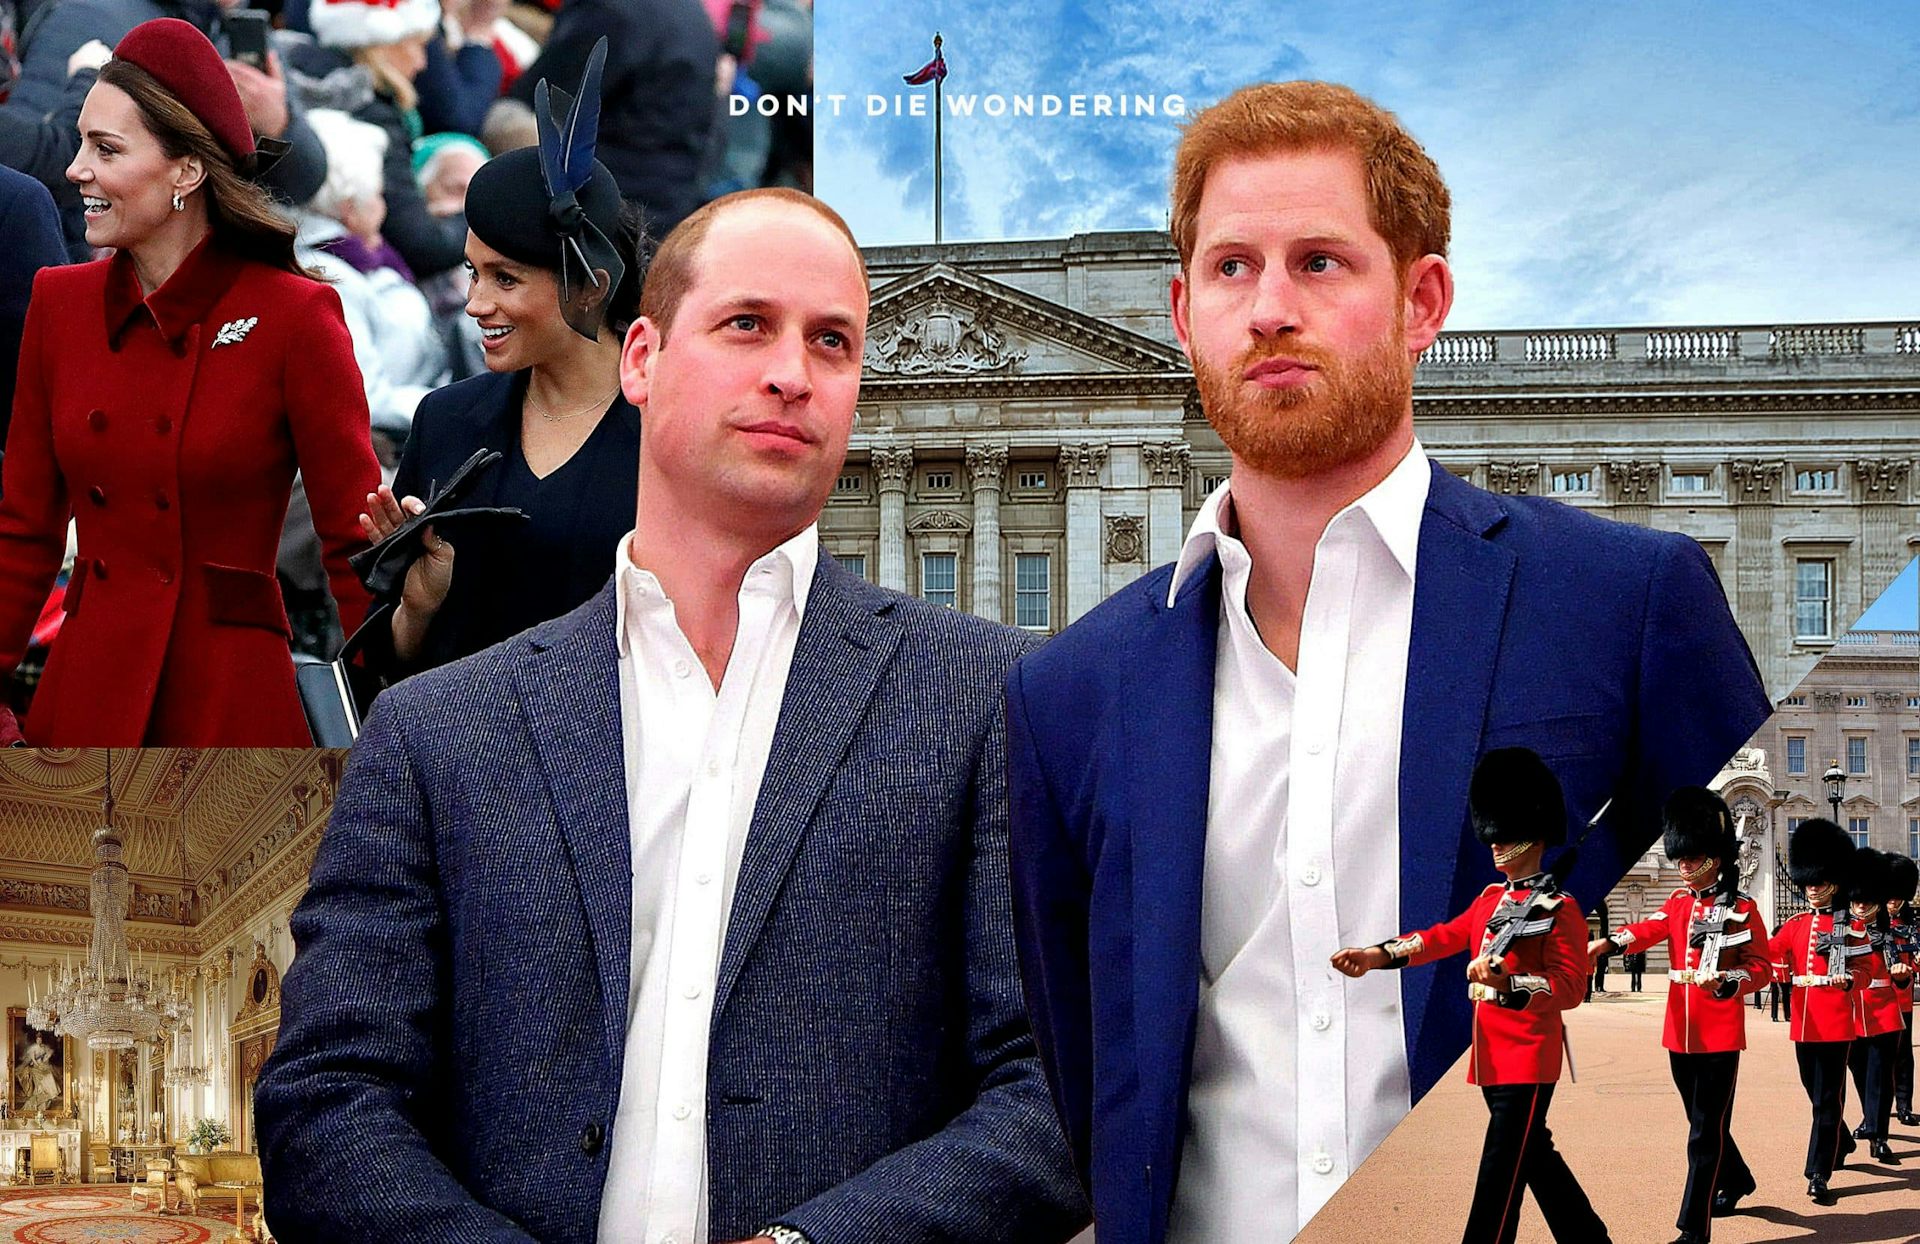 What Exactly Happened Between William And Harry?